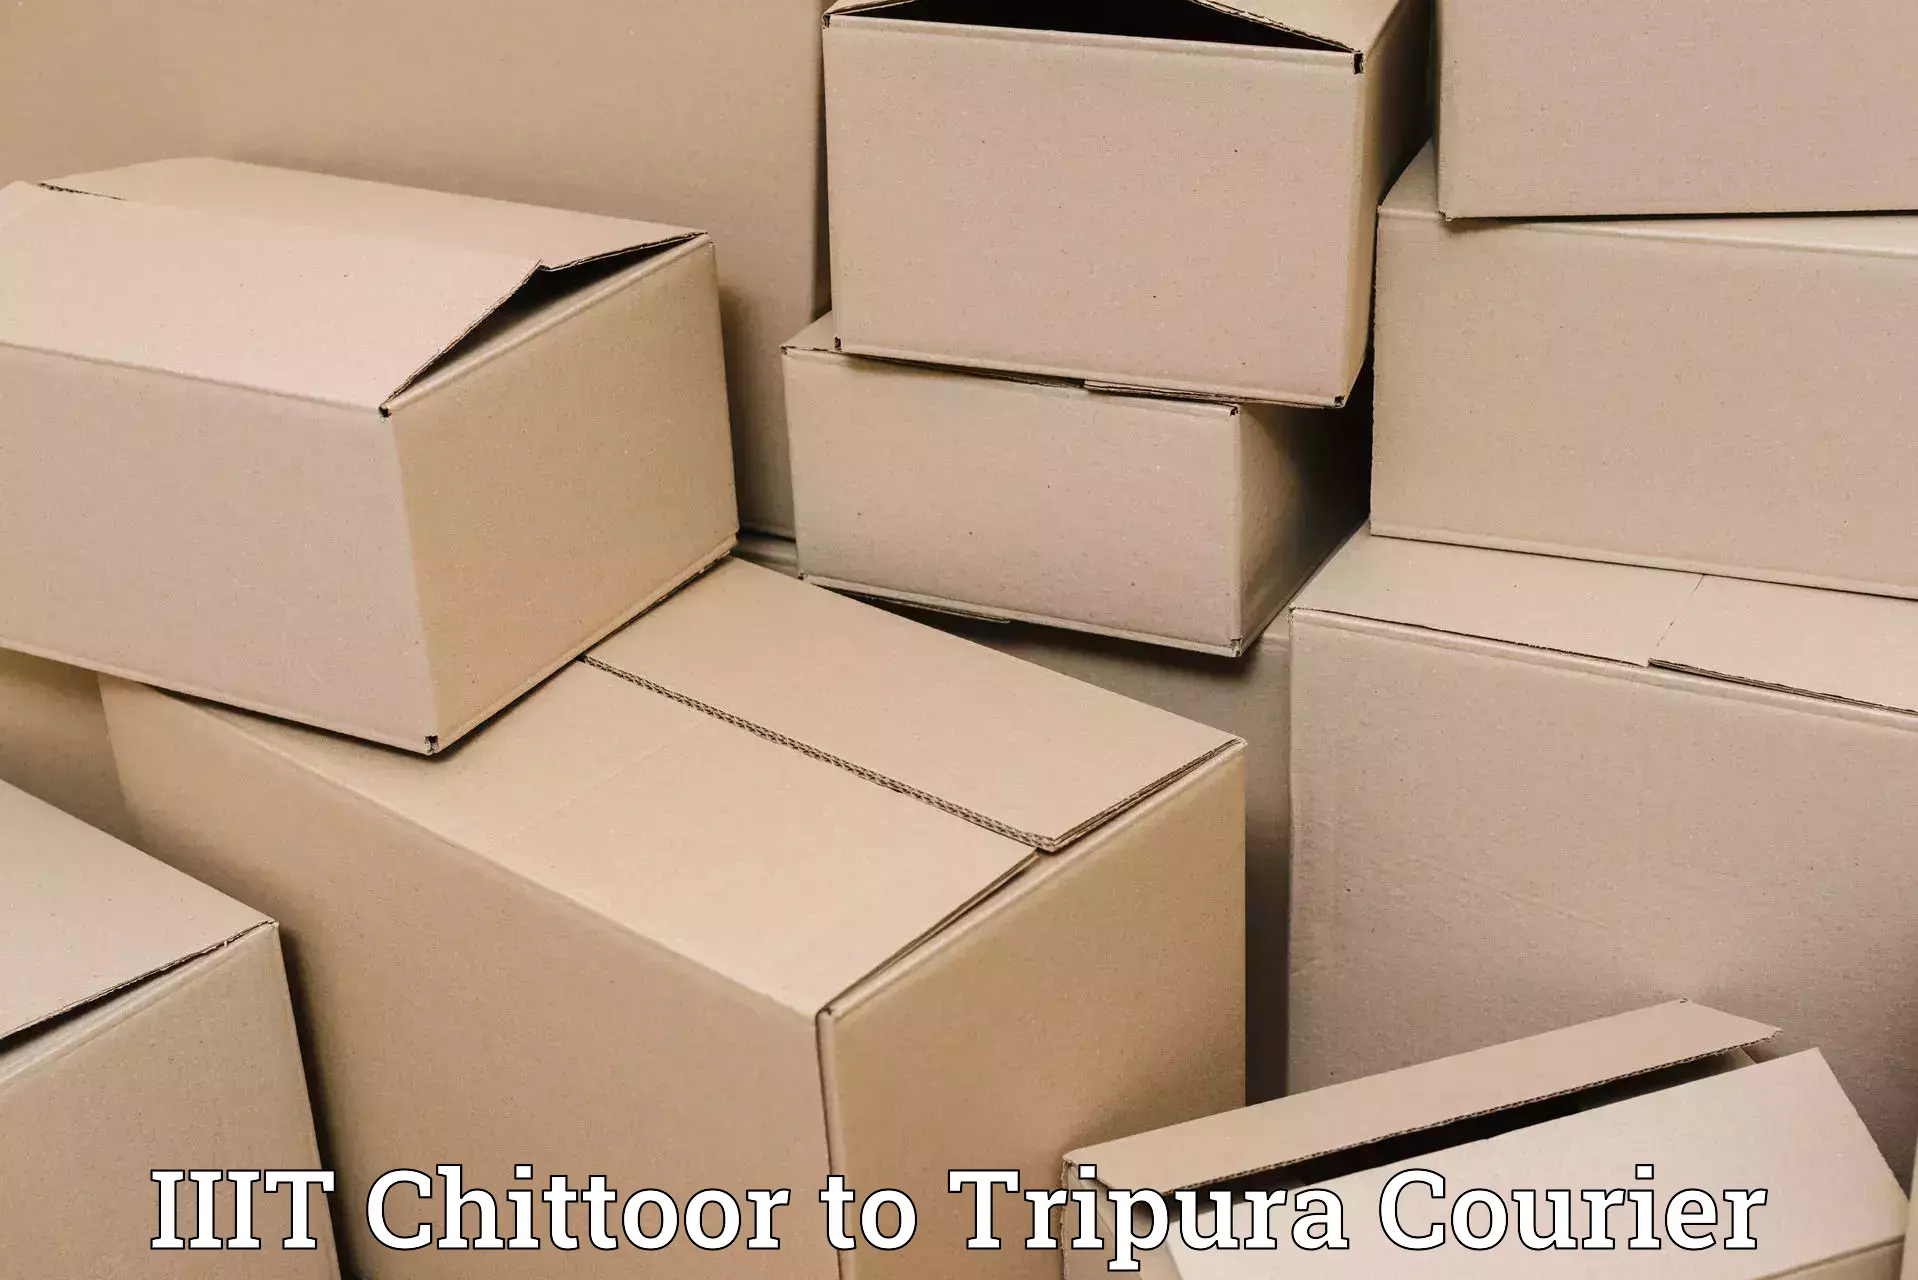 Quality courier services in IIIT Chittoor to Manu Bazar